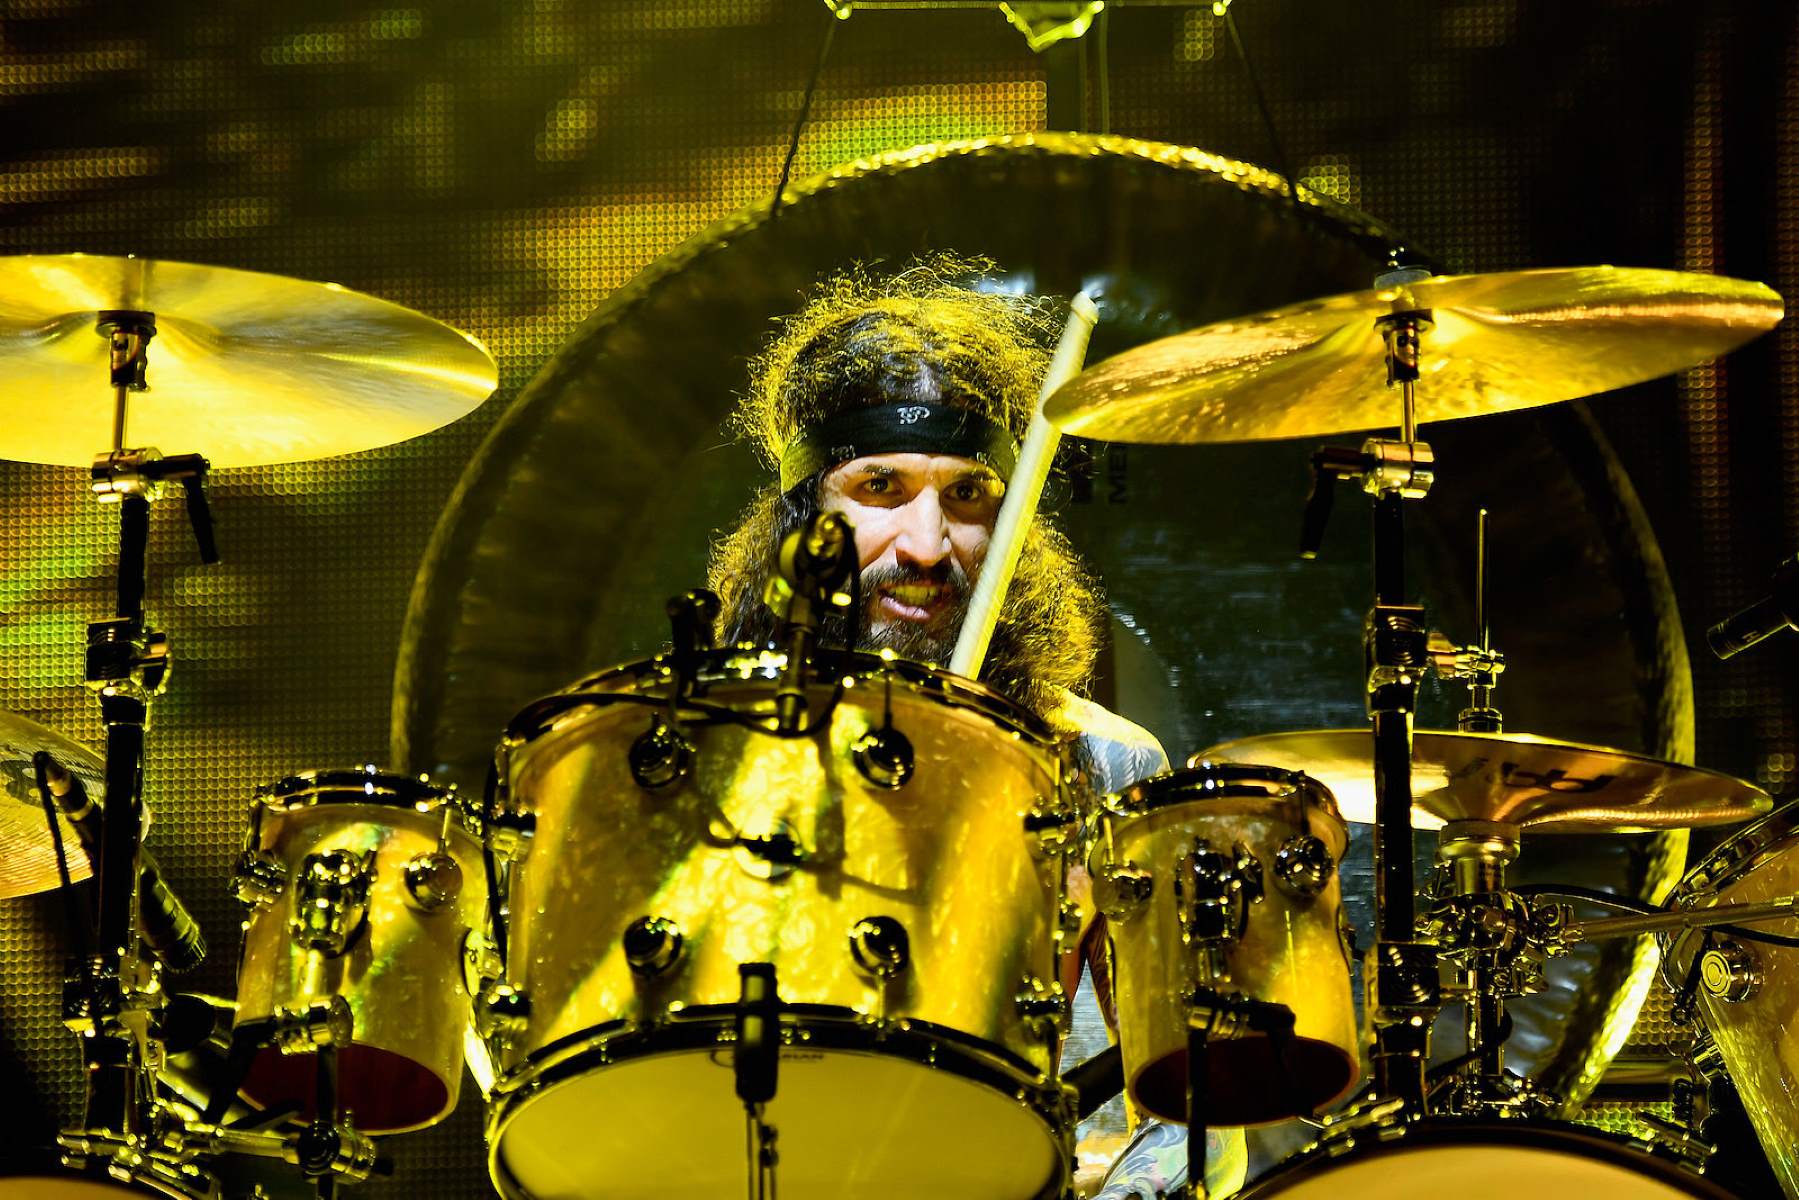 Who Plays Drums For Black Sabbath